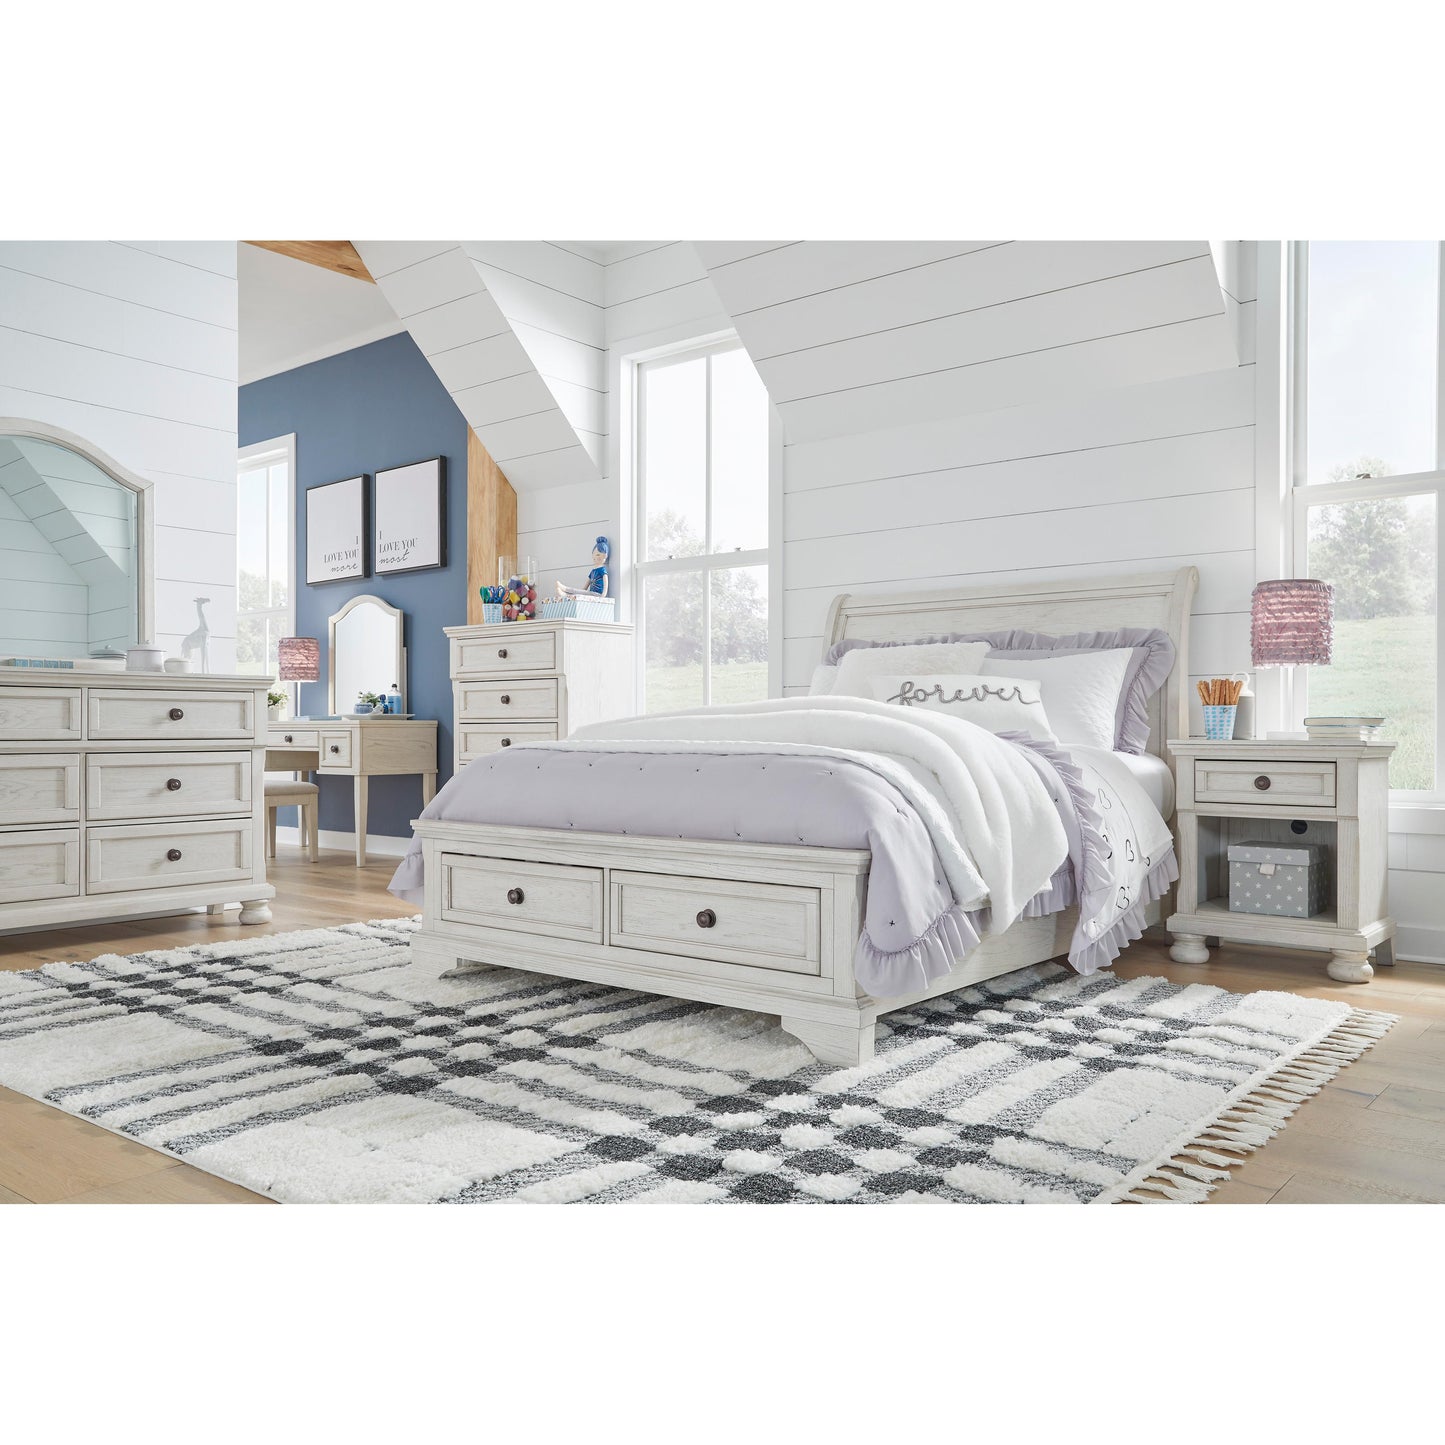 Signature Design by Ashley Kids Beds Bed B742-87/B742-84S/B742-183 IMAGE 6